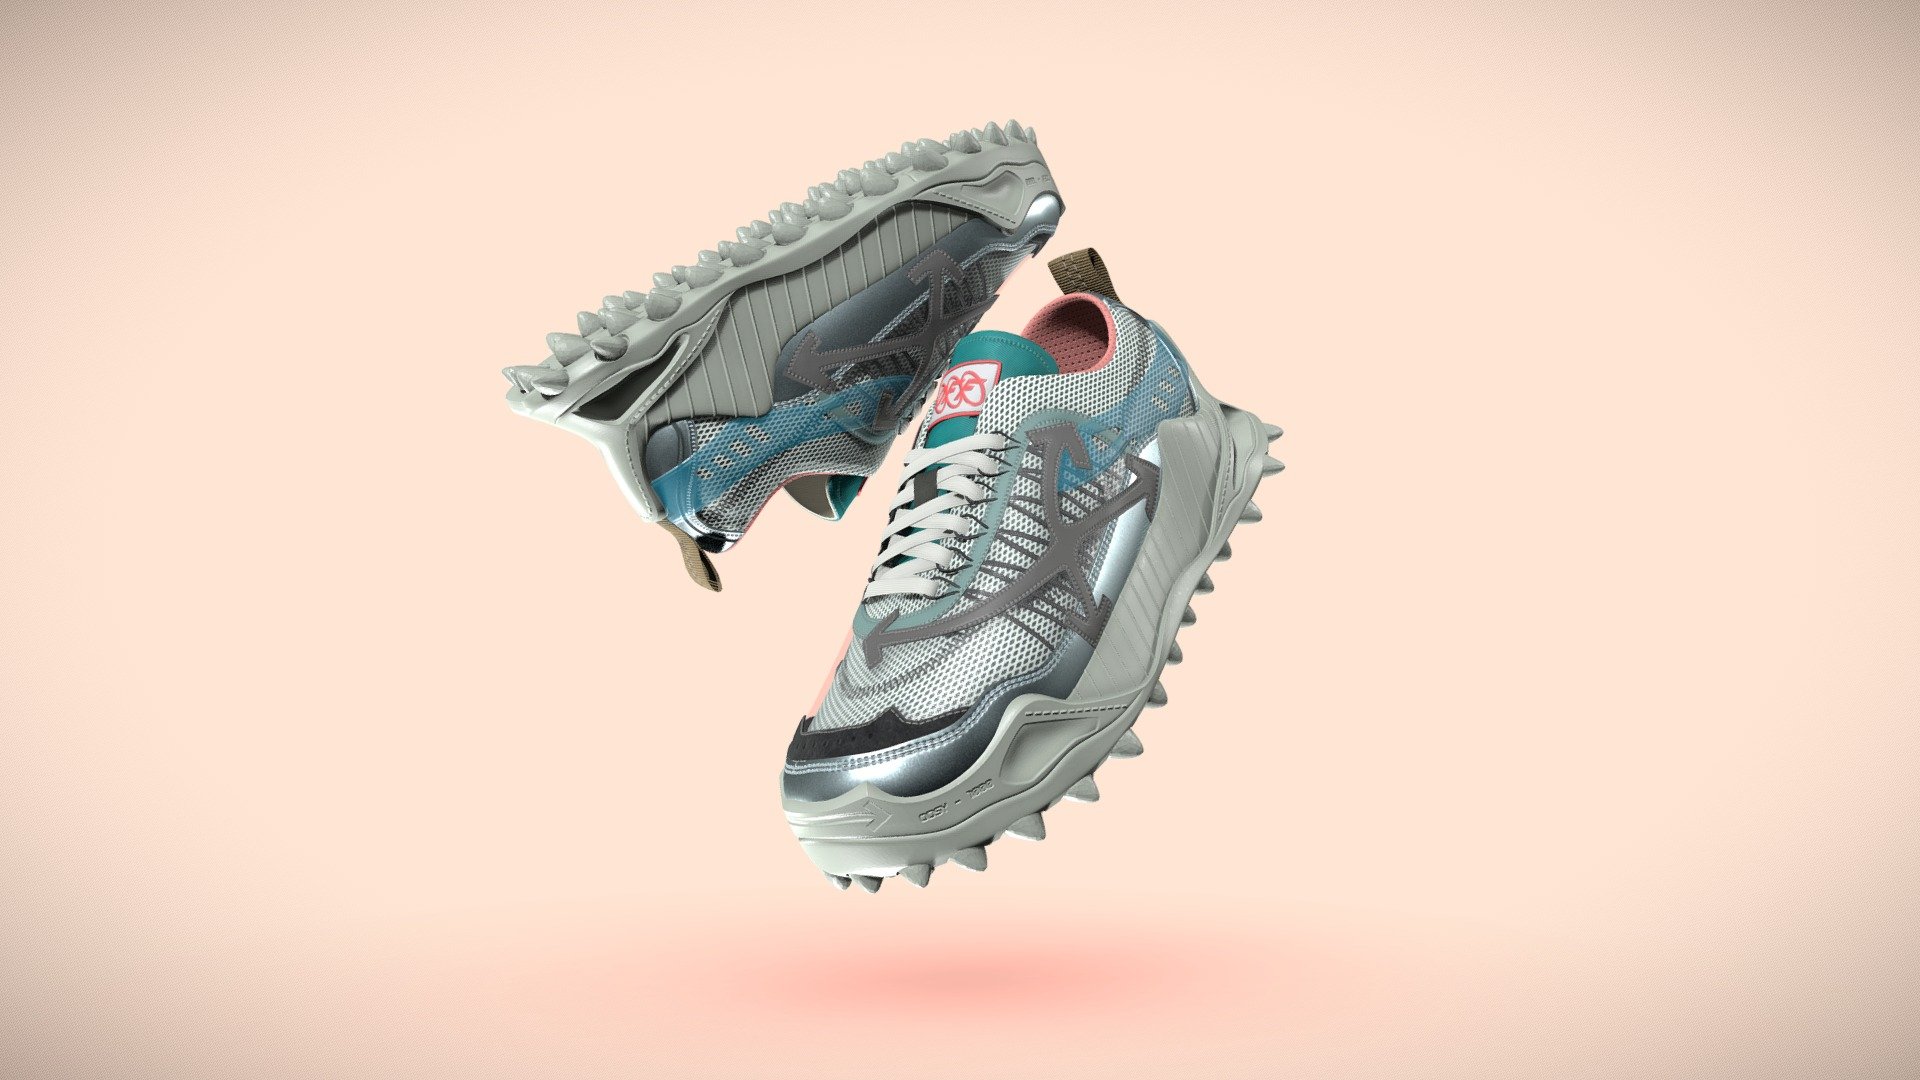 The ODSY-1000 sneaker by Off-White, visualized in 3D.
This model was a collab work with my colleague Angel Yanakiev(https://sketchfab.com/angelyanakiev) who worked on the textures 3d model